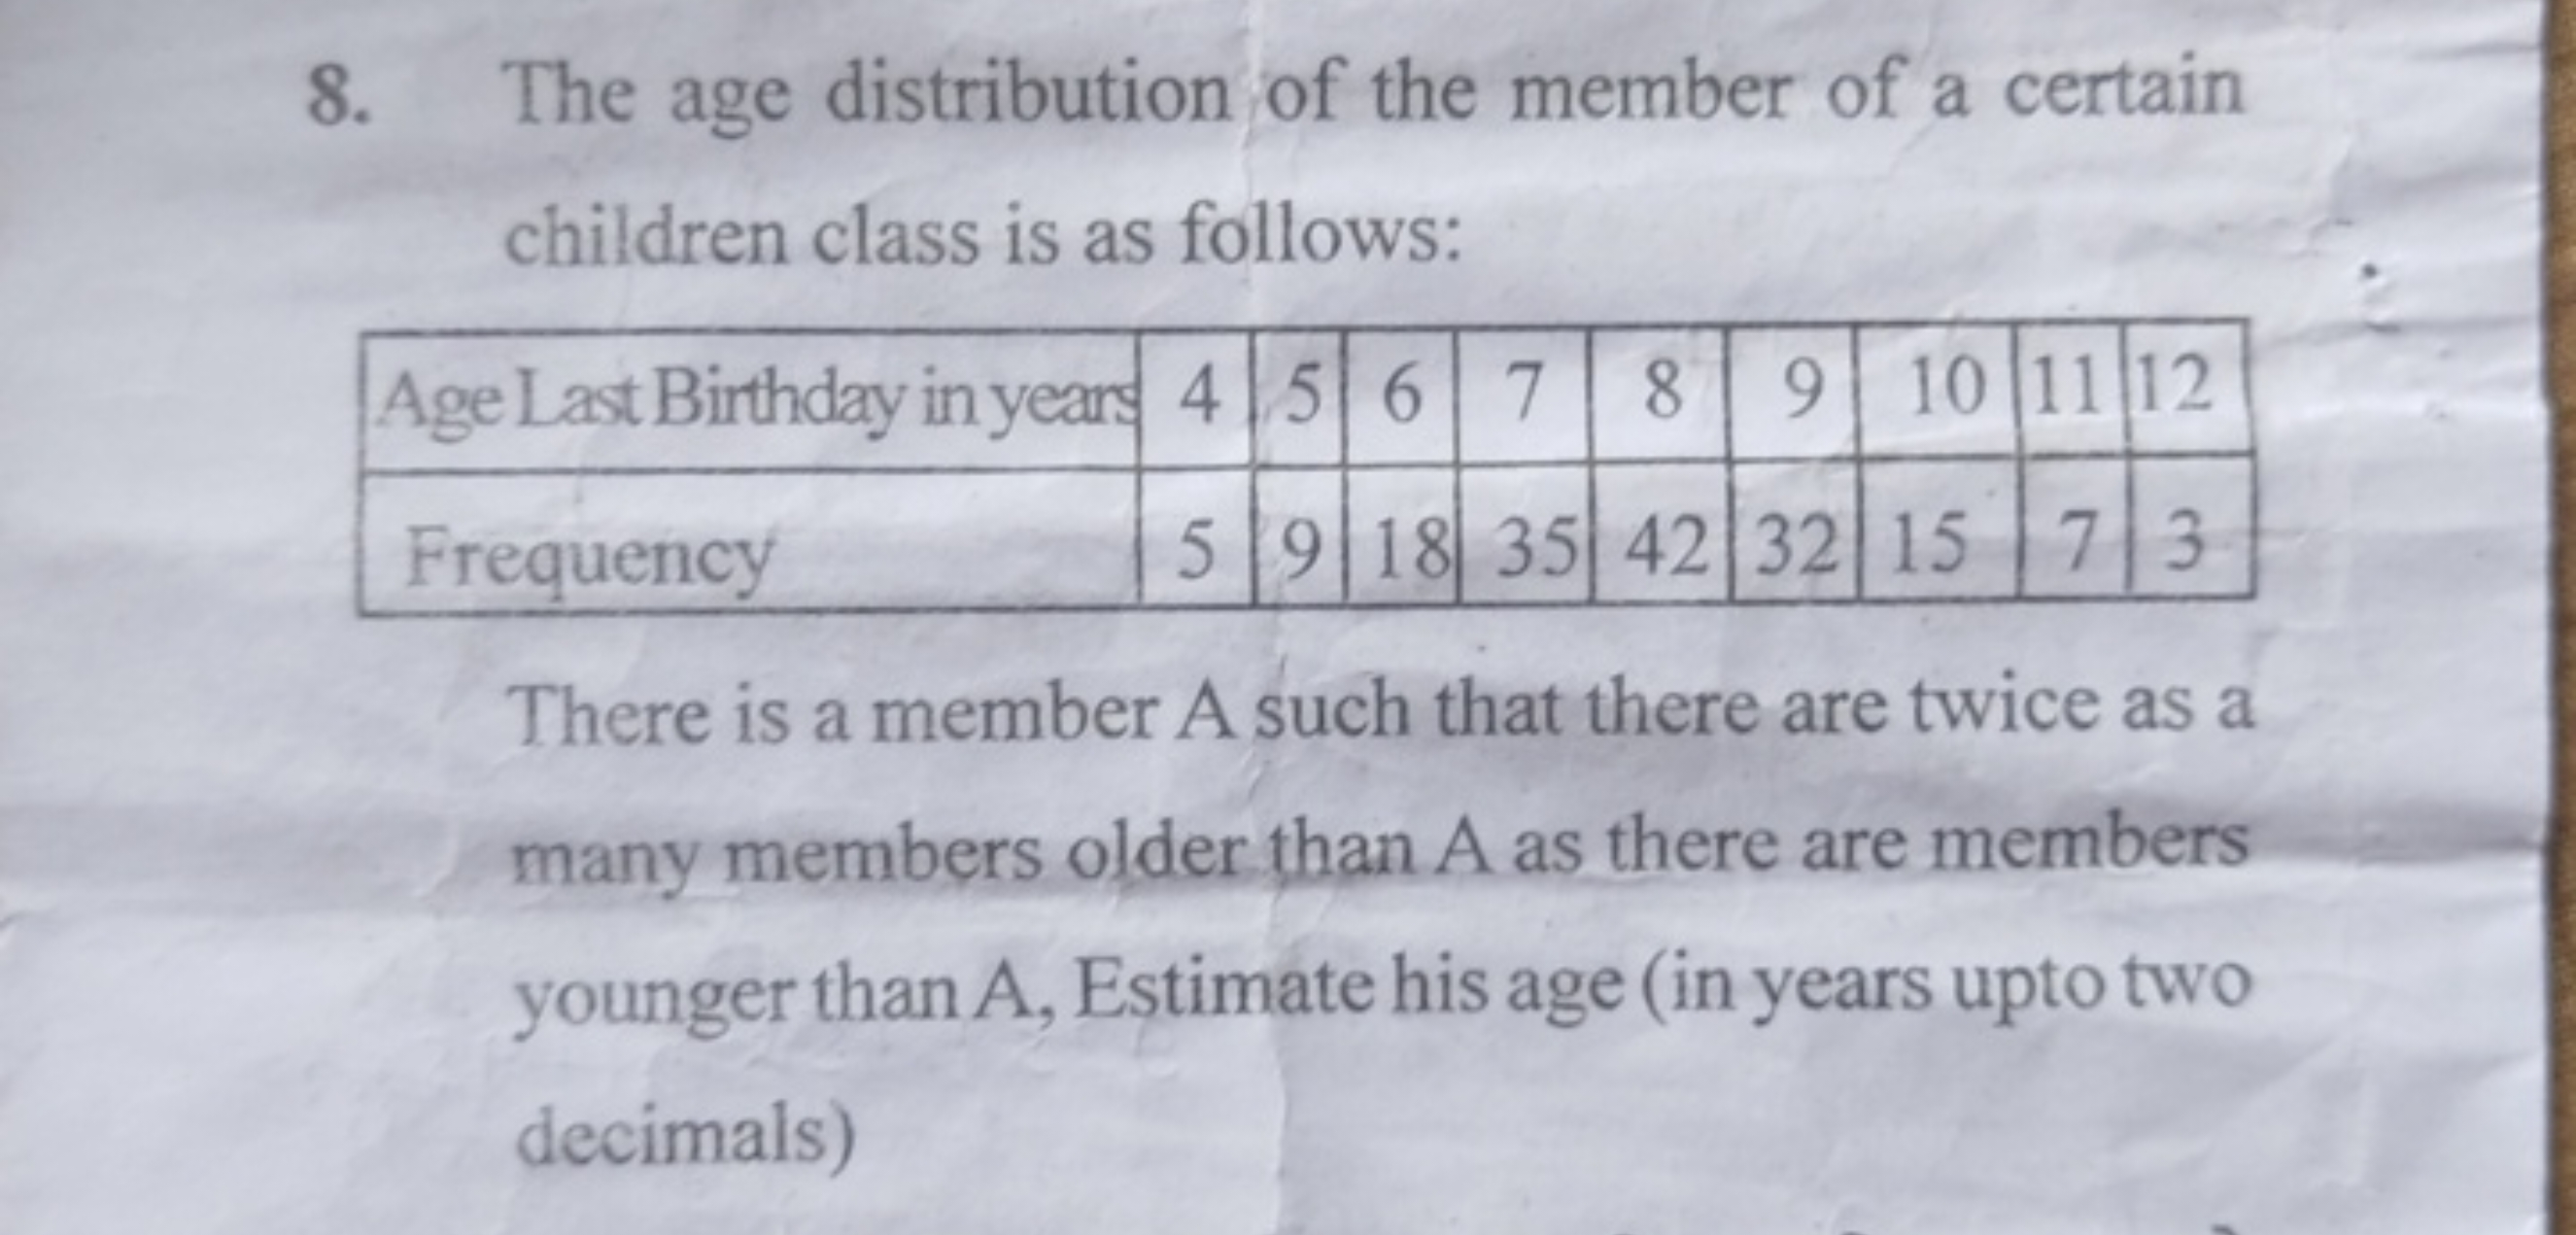 8. The age distribution of the member of a certain children class is a